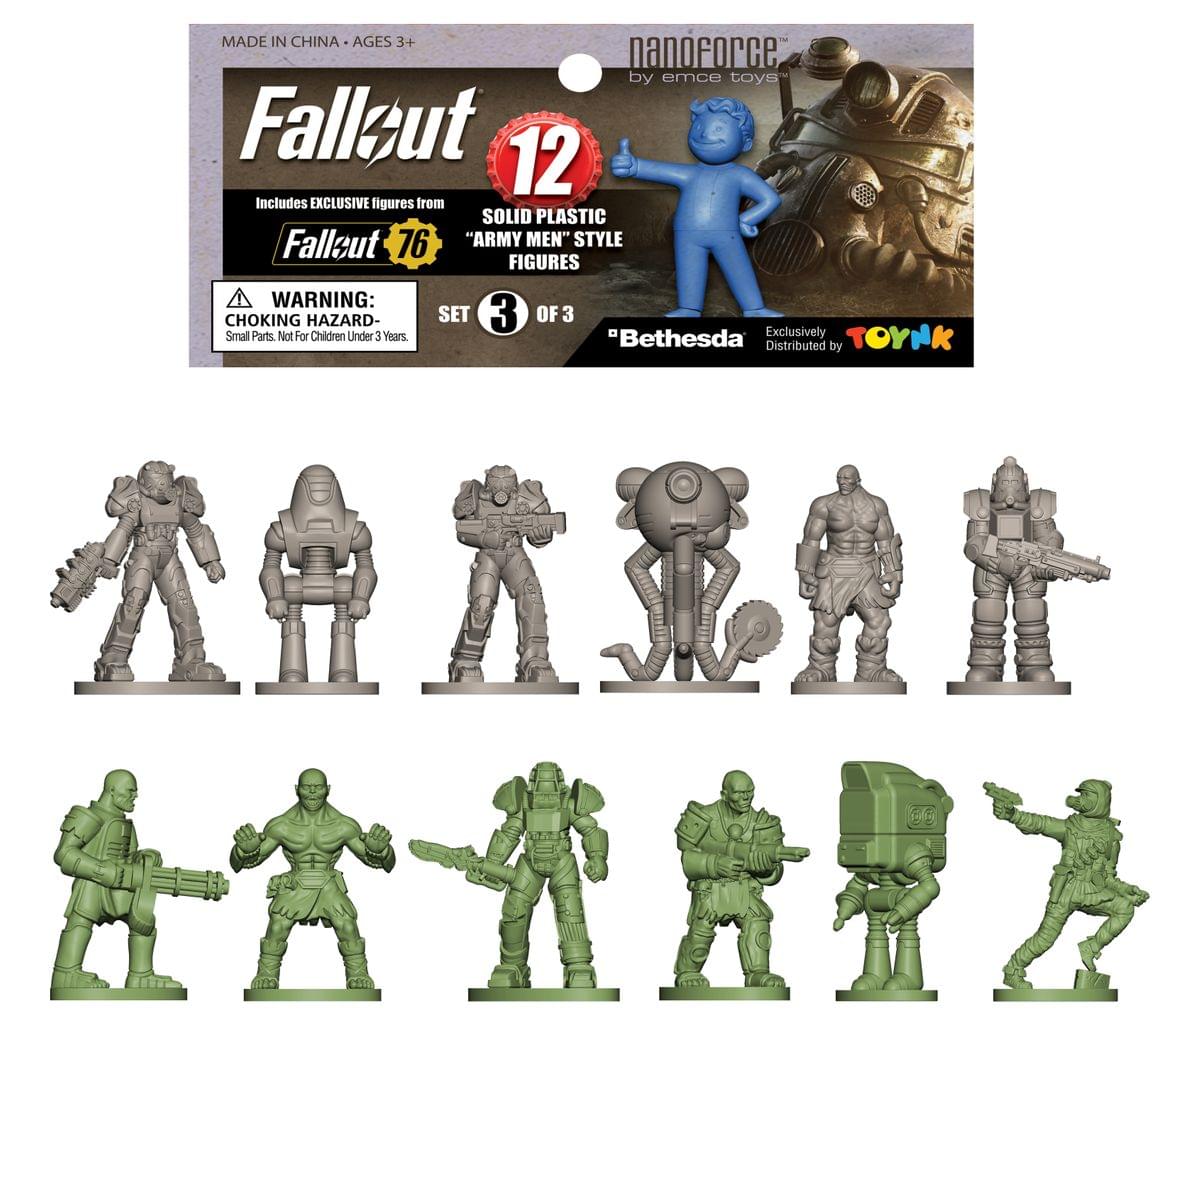 Fallout Nanoforce Series 1 Army Builder Figure Collection - Bagged Version 3